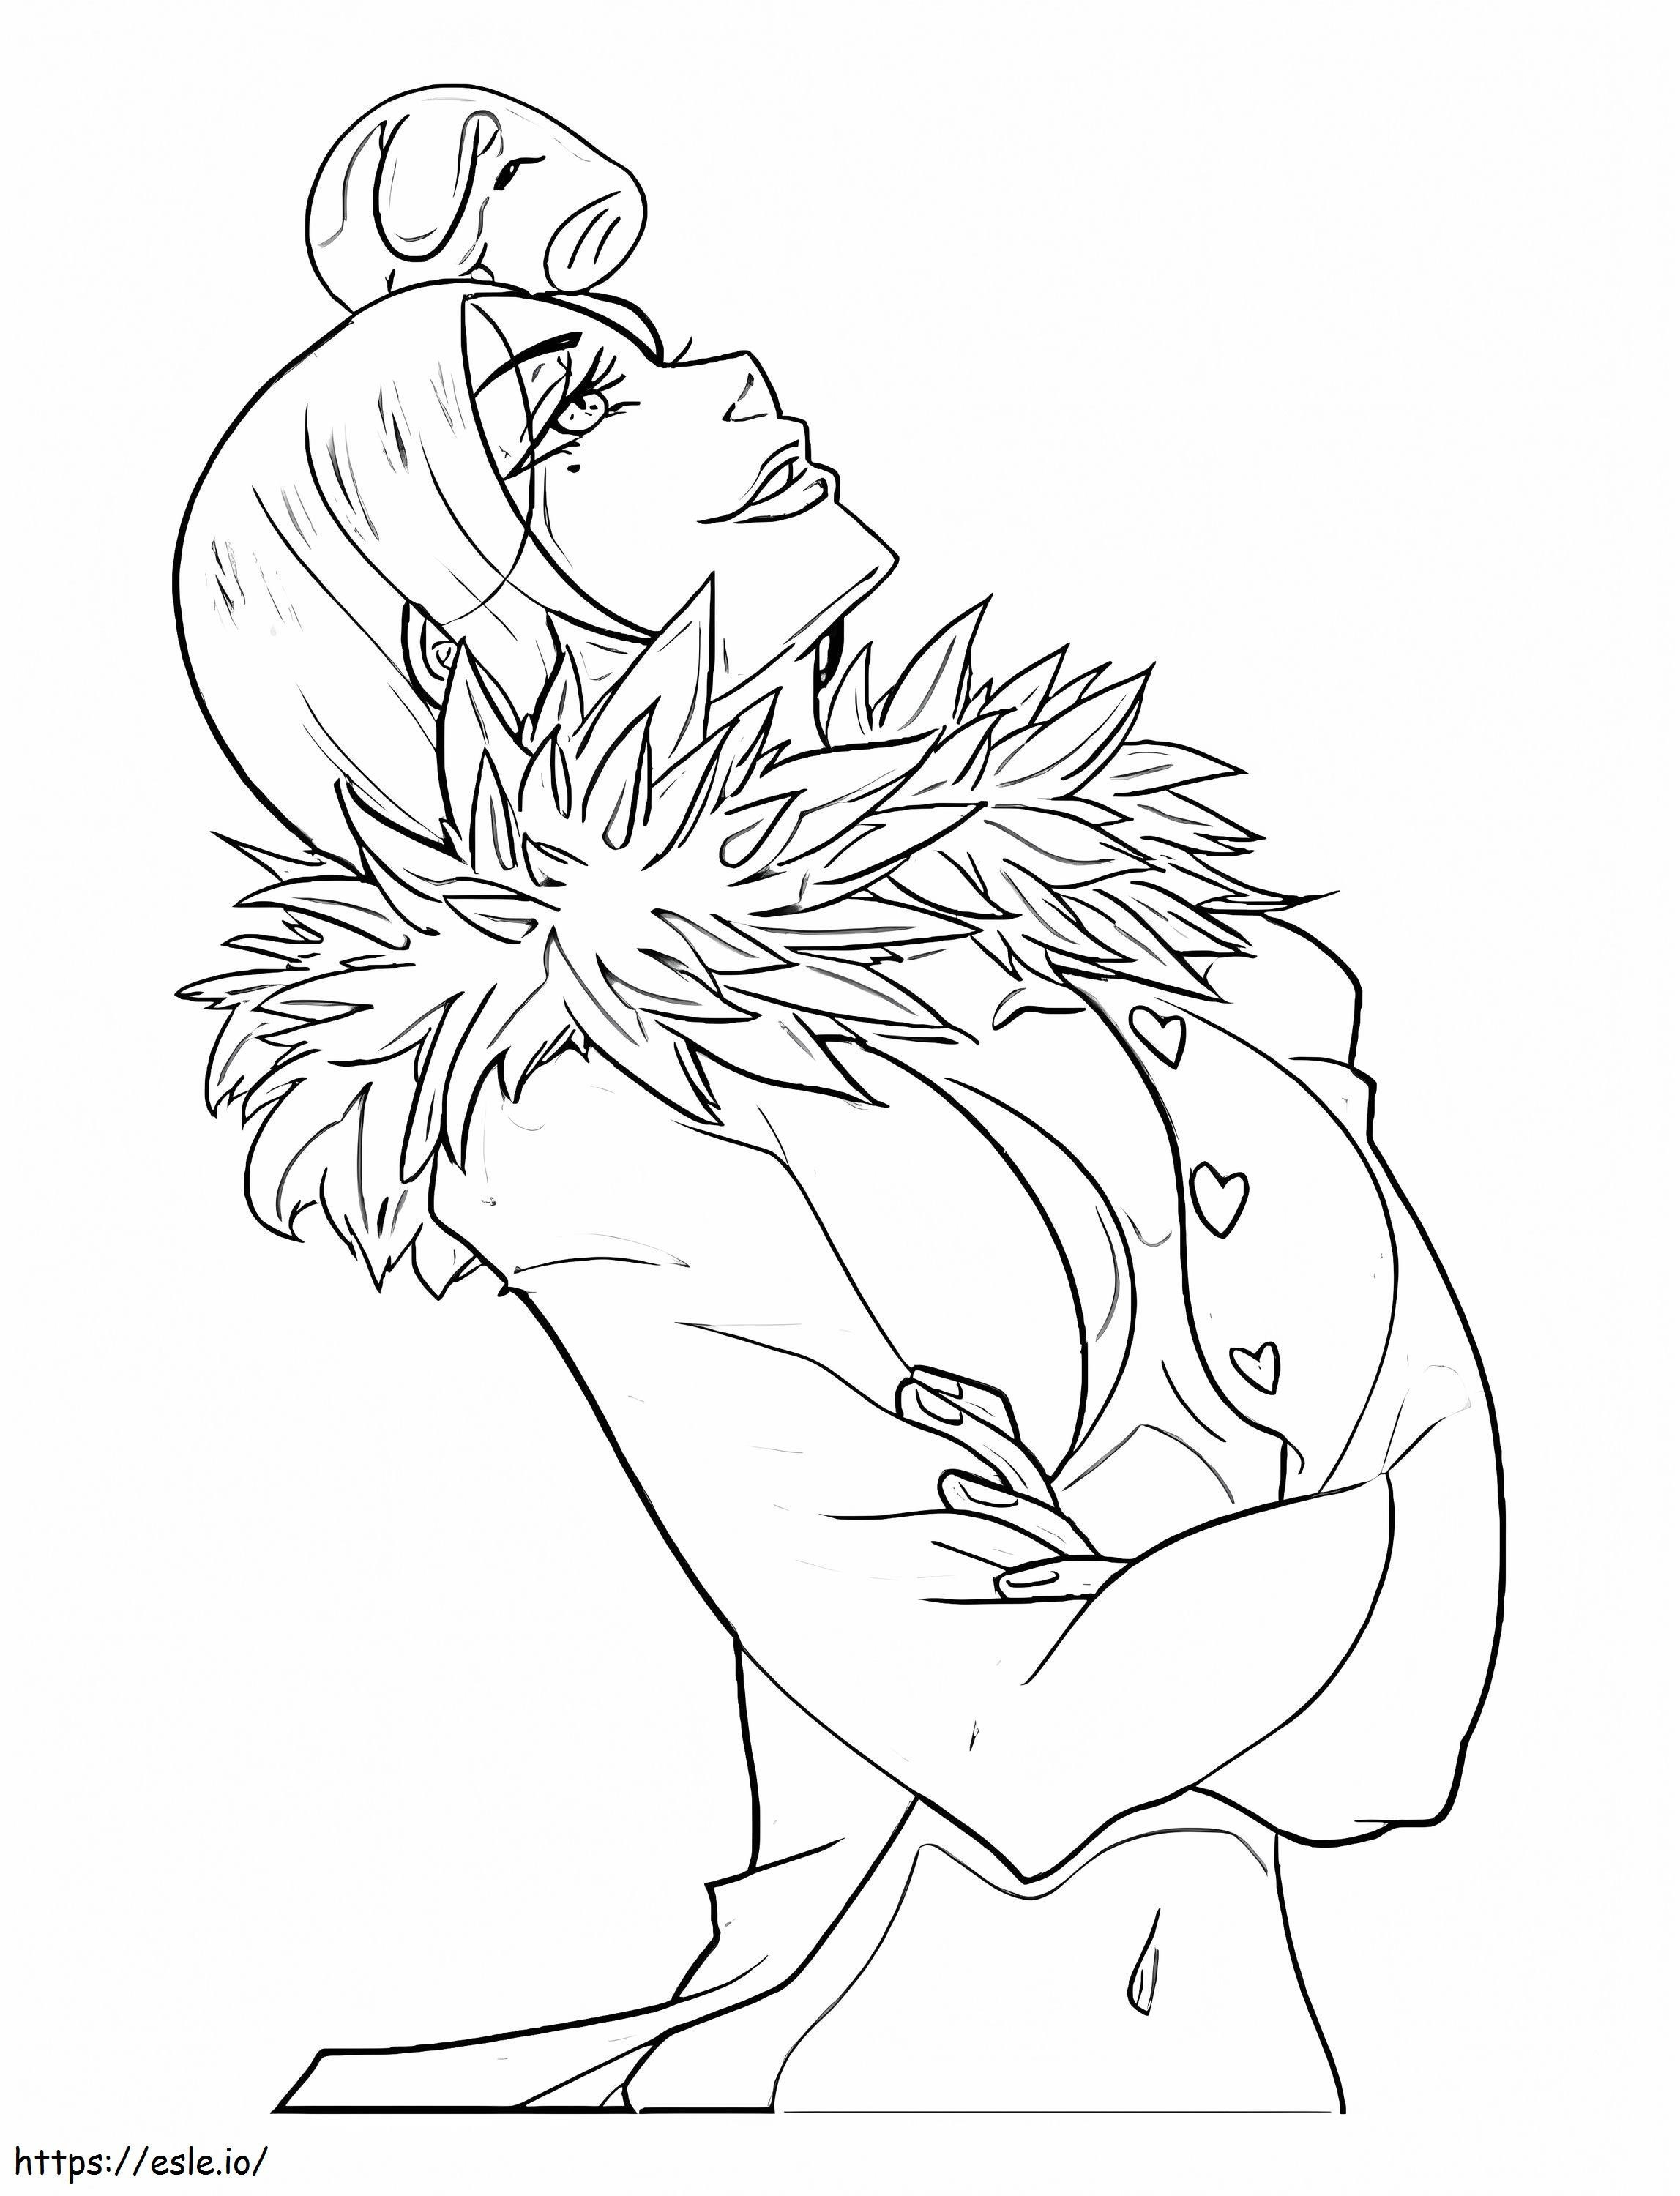 Merlin From The Seven Deadly Sins coloring page